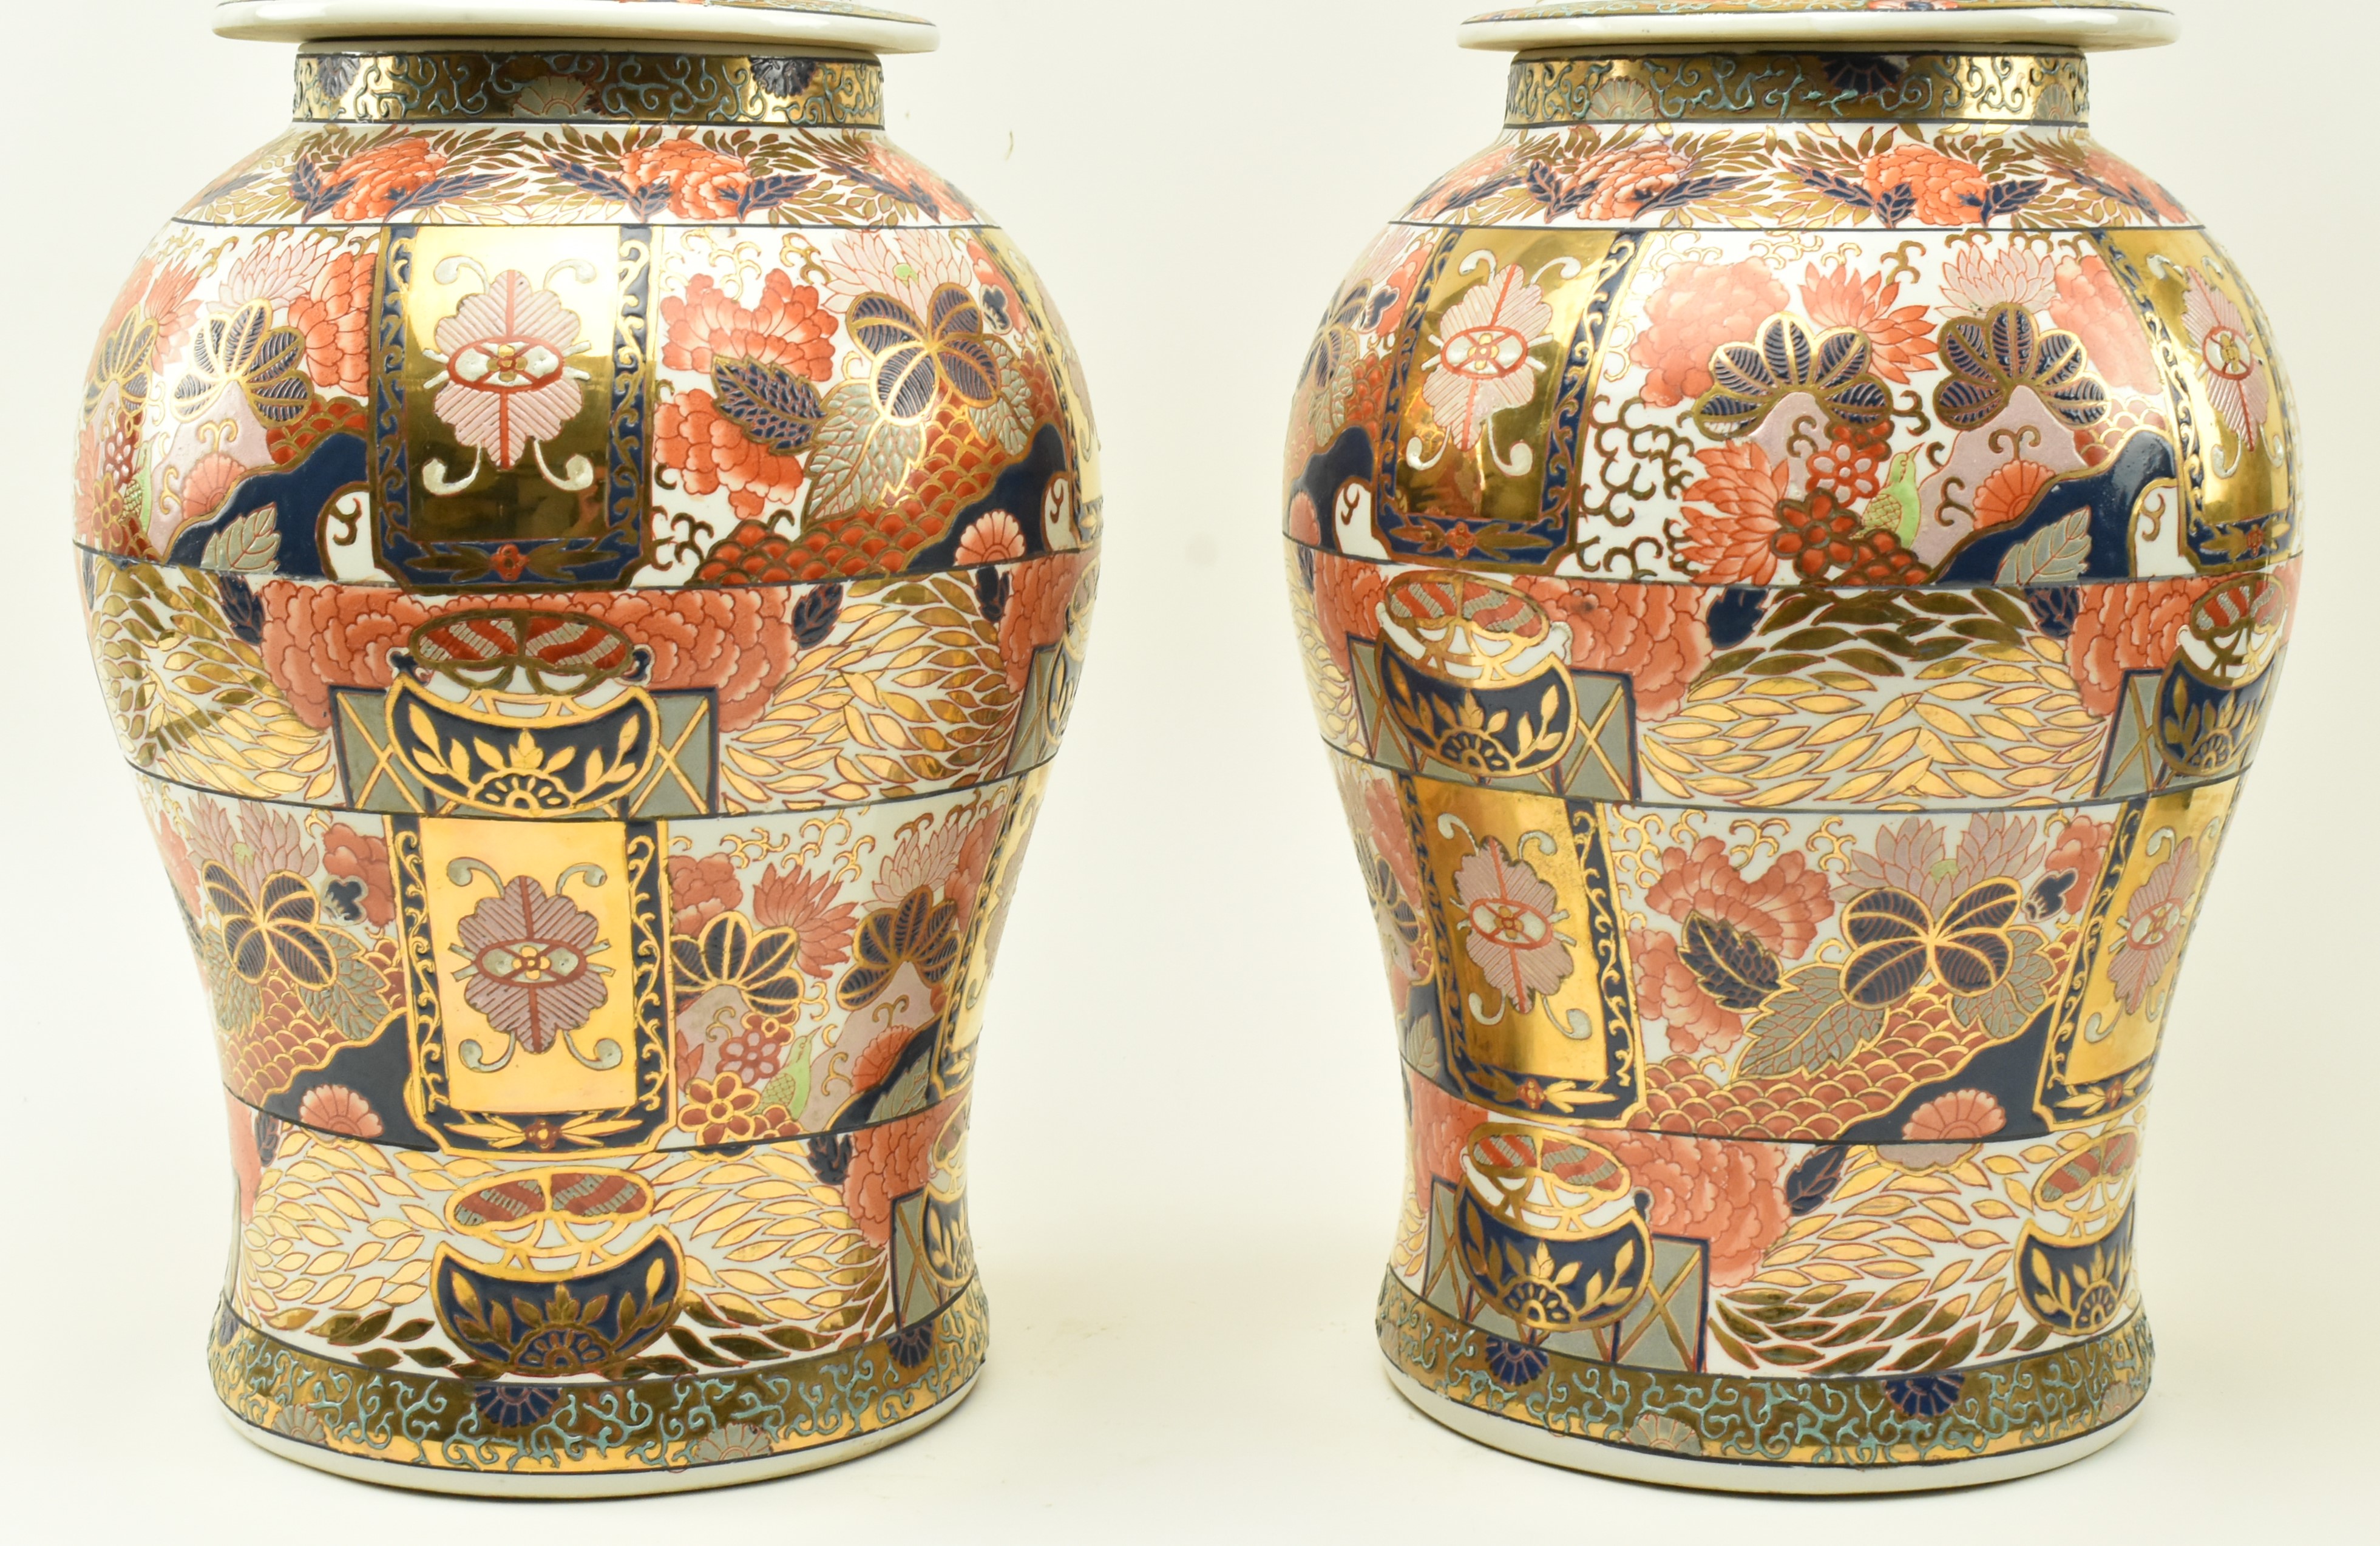 PAIR OF ROYAL CROWN DERBY STYLE LIDDED BALUSTER VASES - Image 3 of 6